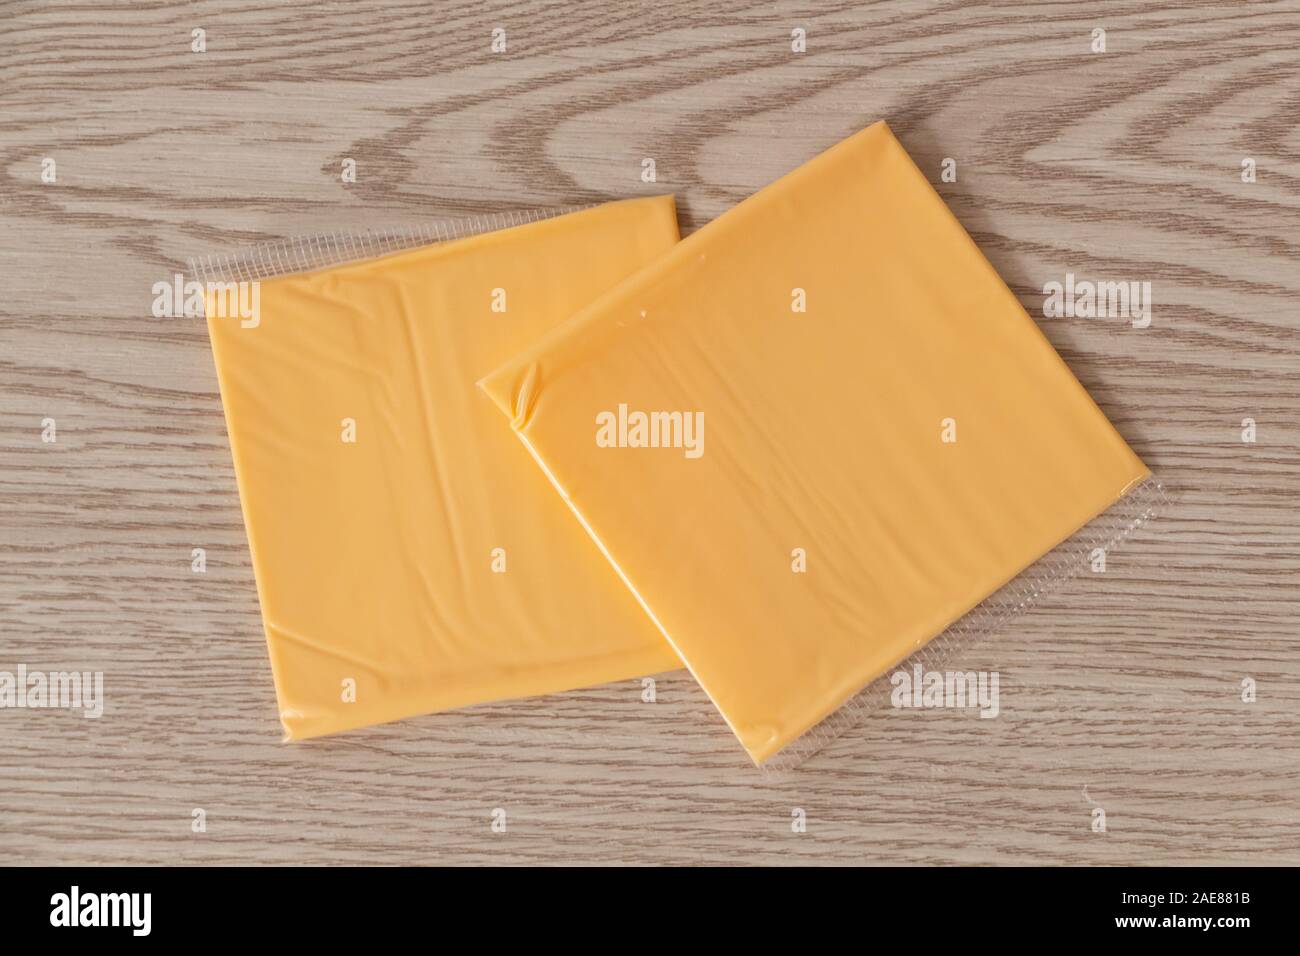 https://c8.alamy.com/comp/2AE881B/two-portions-of-processed-cheese-with-cheddar-in-plastic-packaging-2AE881B.jpg